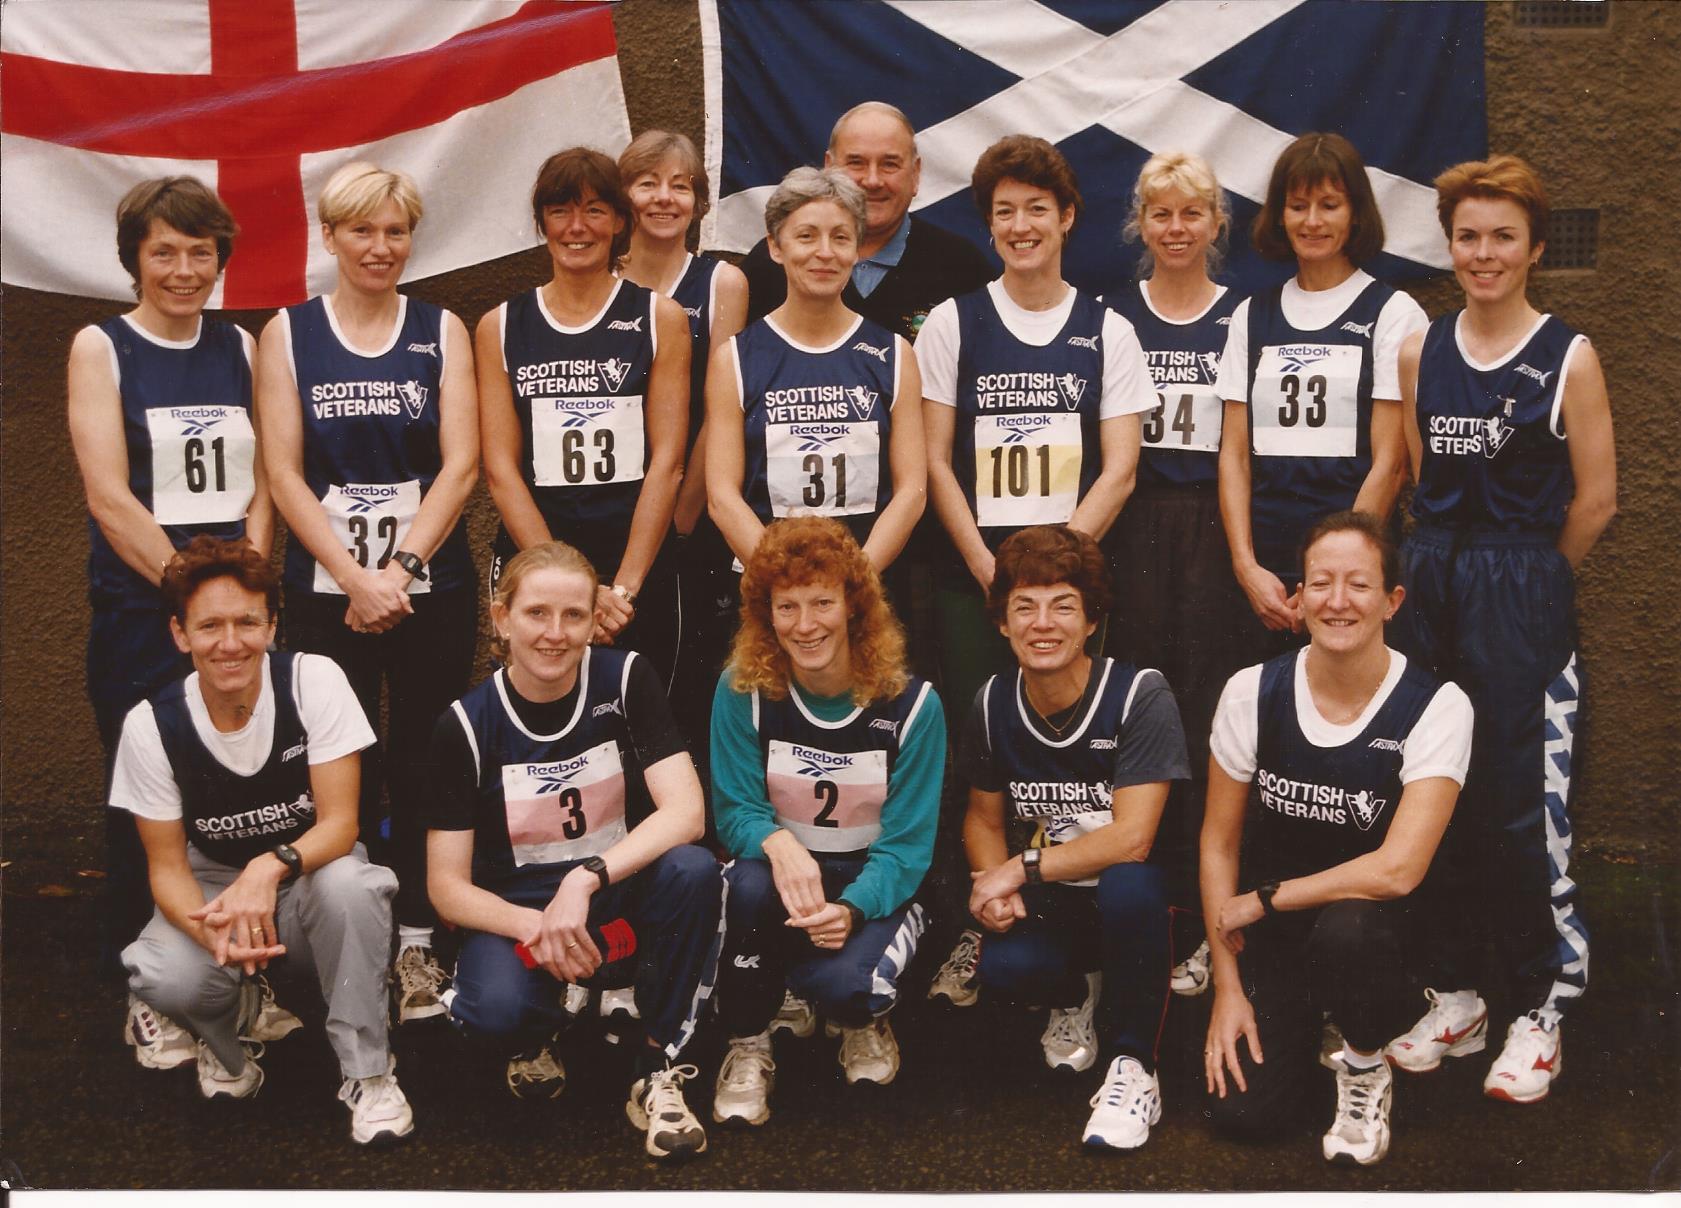 Danny with the Scottish Women's team at Ballymena, 1995